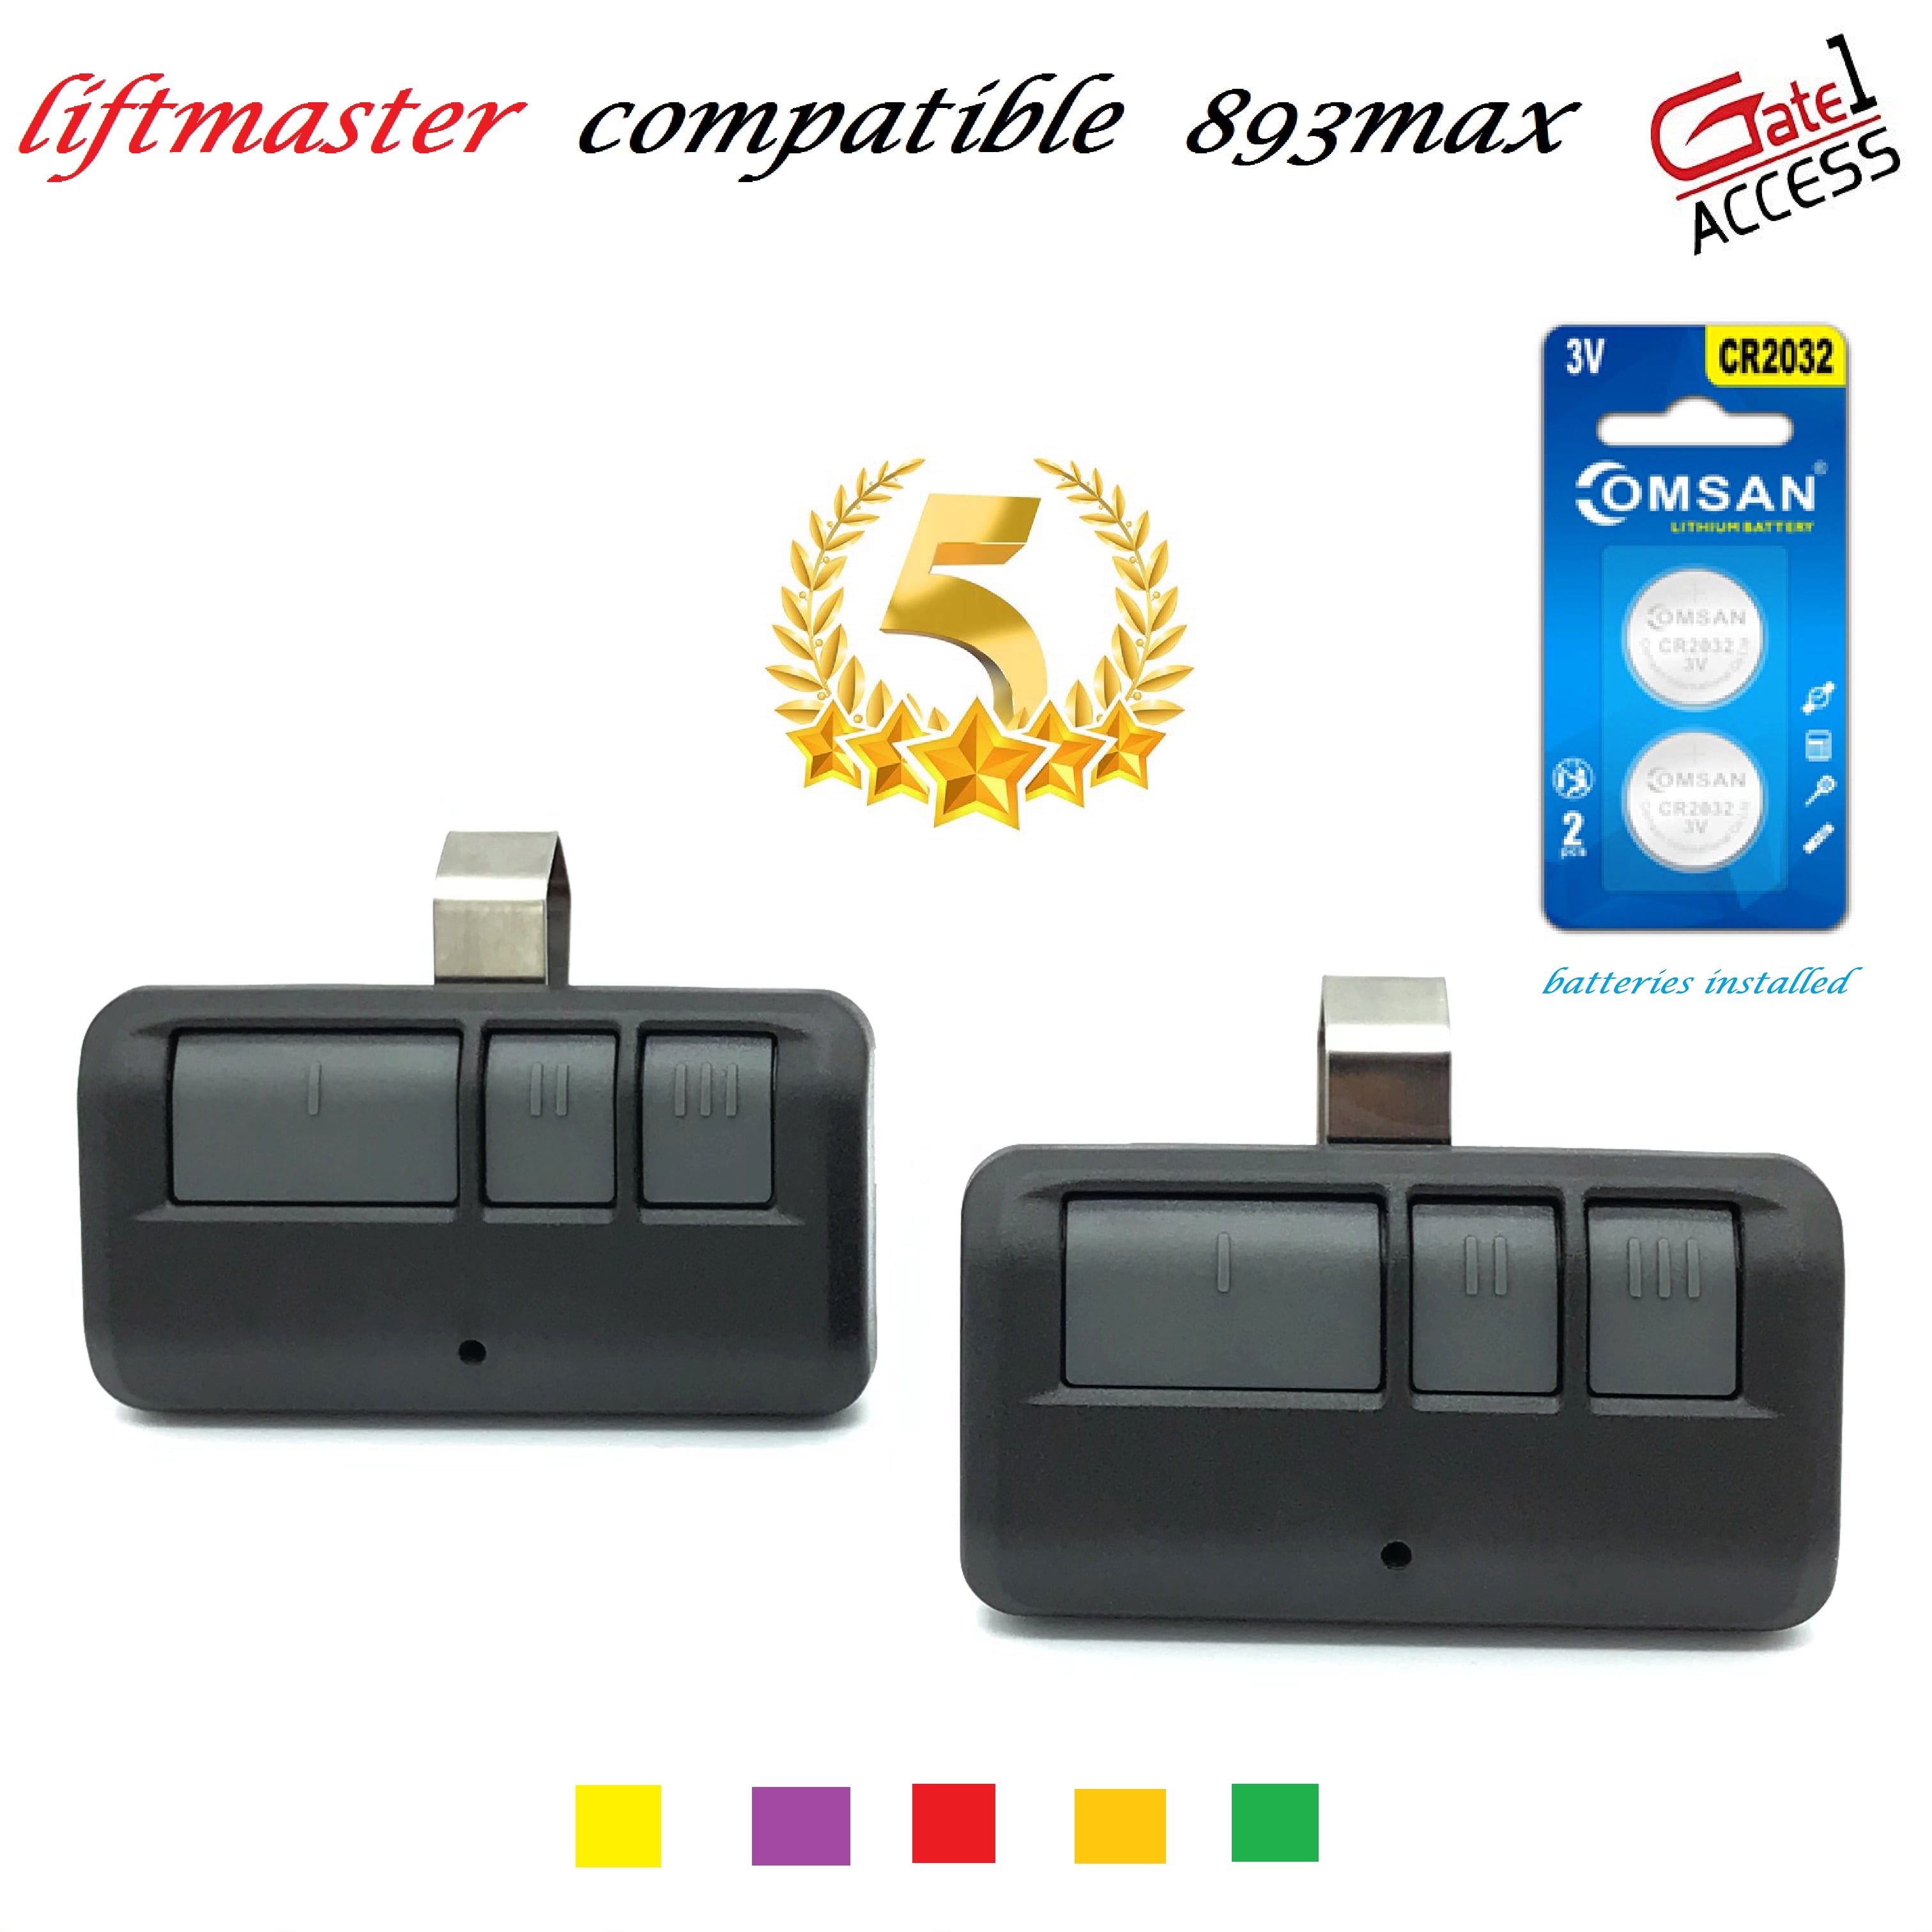 Gate1access 2 Pack For Liftmaster 893max Visor Style Garage Door Opener Remote Transmitter 81lm 371lm 373lm 891lm 893lm 971lm 973lm Walmart Com Walmart Com